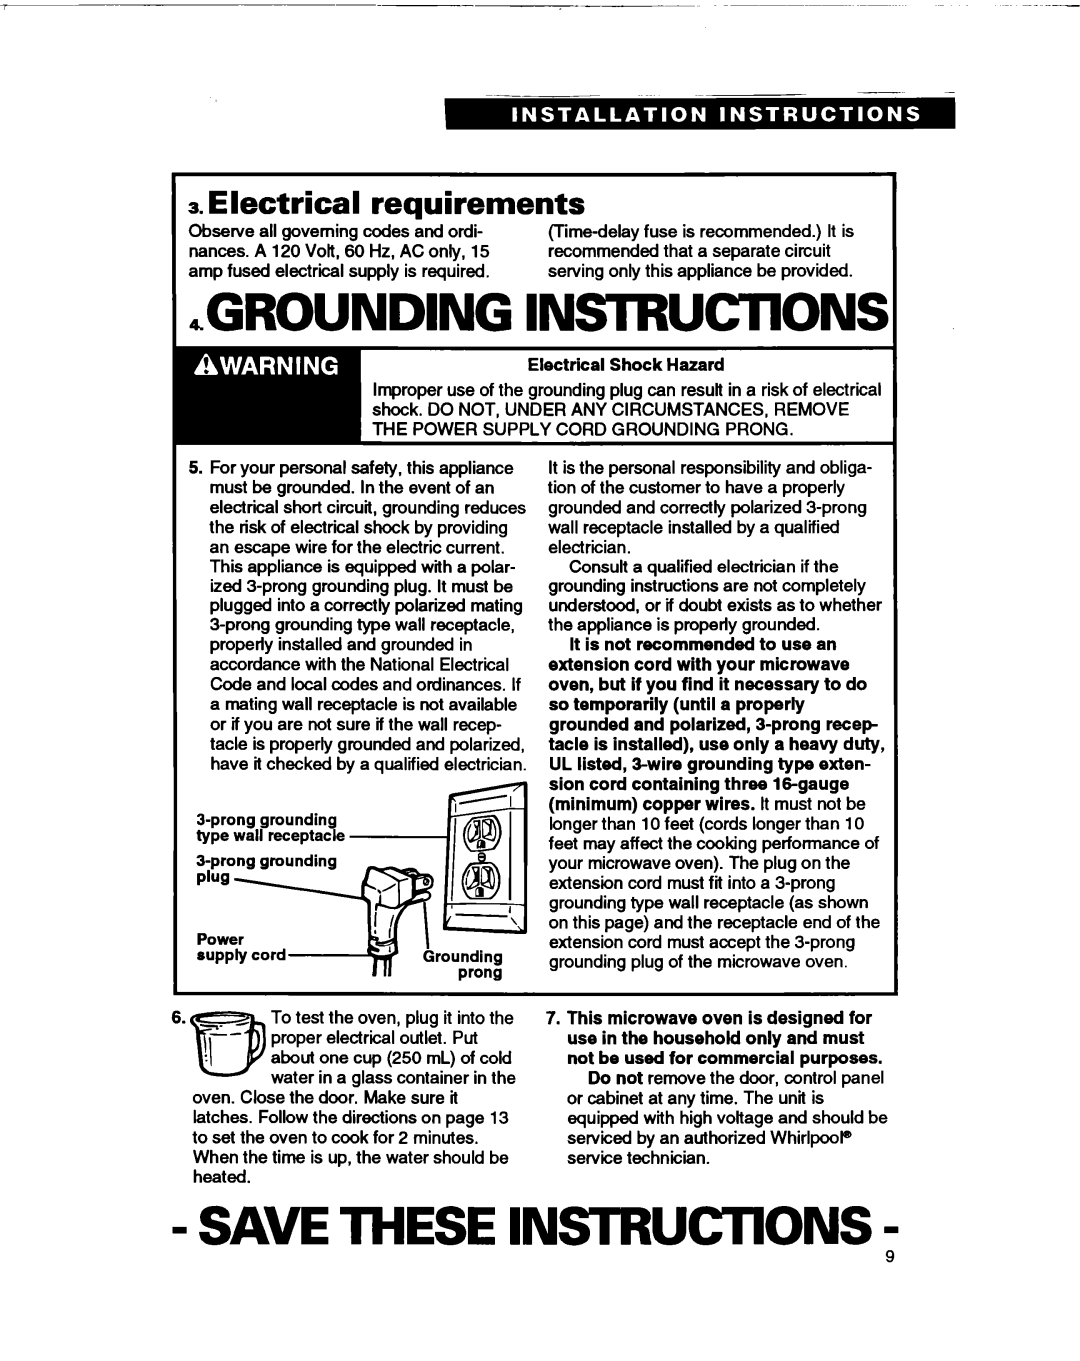 Whirlpool MT0060XB Grounding Instructions, Save These Instructions, Electrical requirements, Electrical Shock Hazard 